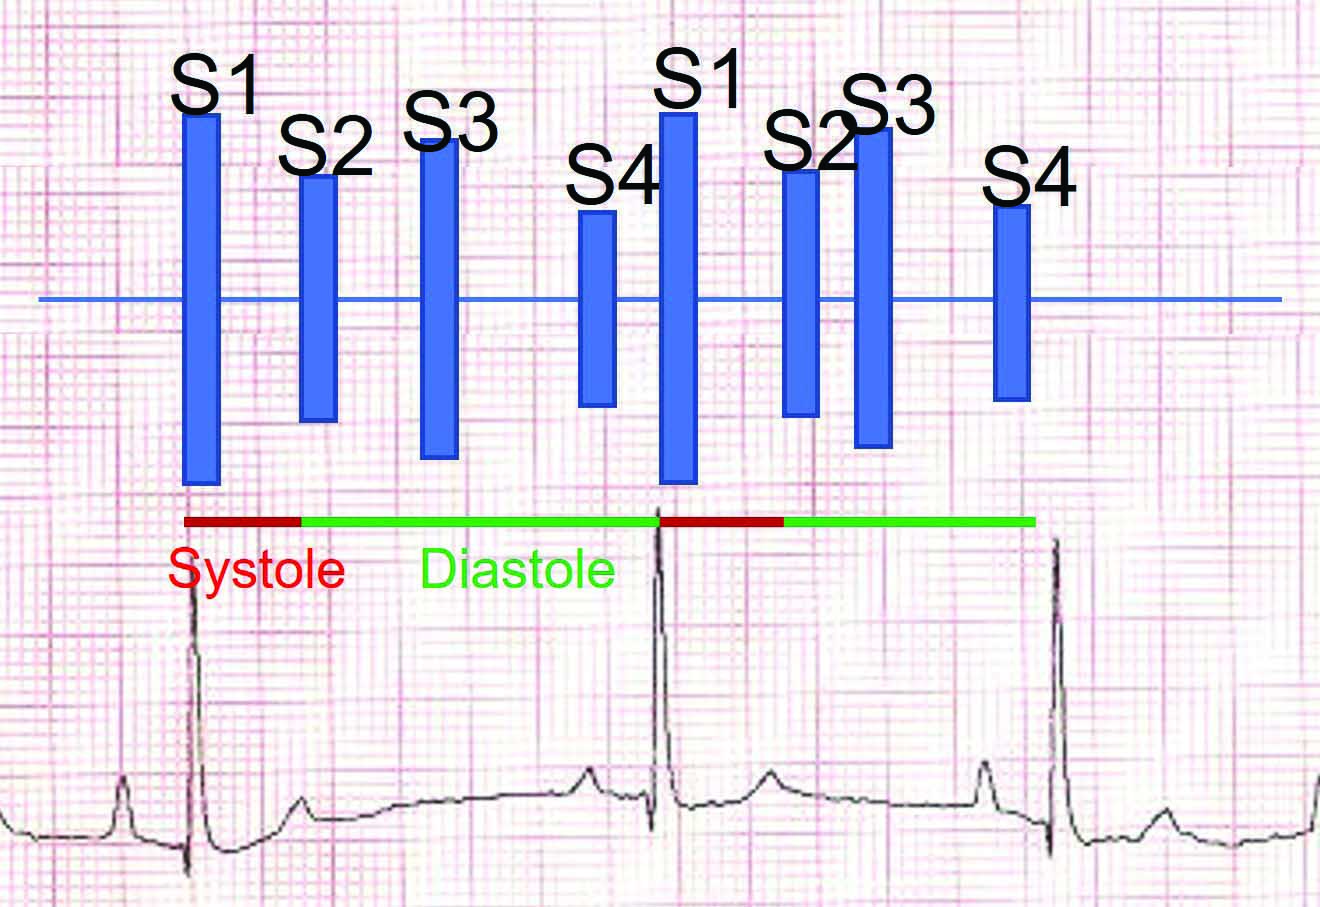 Auscultation of gallop sounds is generally indicative of the presence of diastolic dysfunction